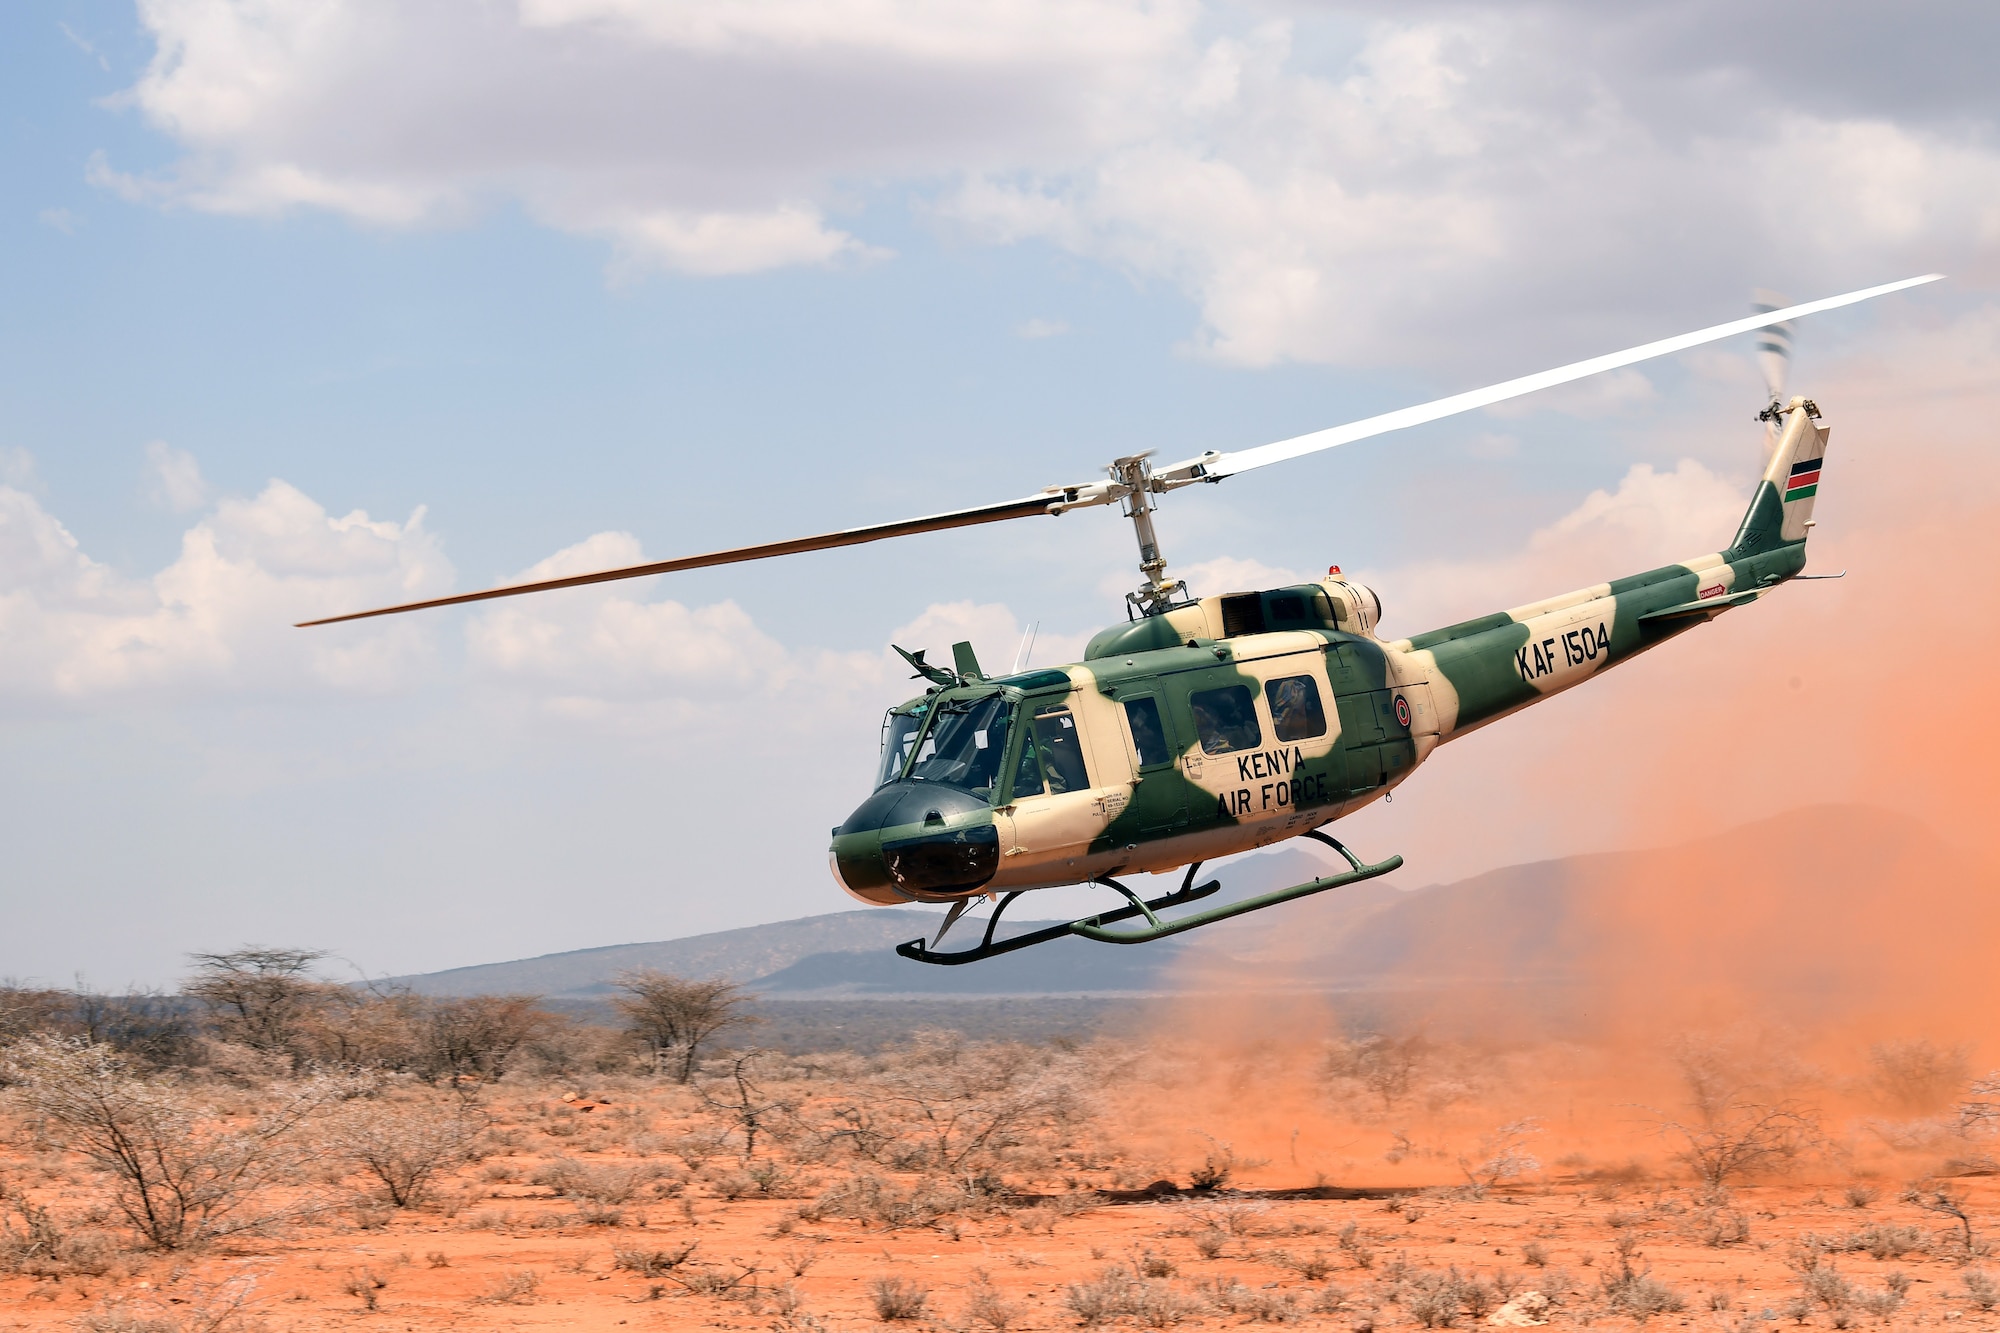 A Kenya air force UH-1 Huey takes off after rescuing a simulated isolated pilot during the final demonstration of African Partnership Flight Kenya 2019. Larisoro Air Strip, Kenya, August 24, 2019.